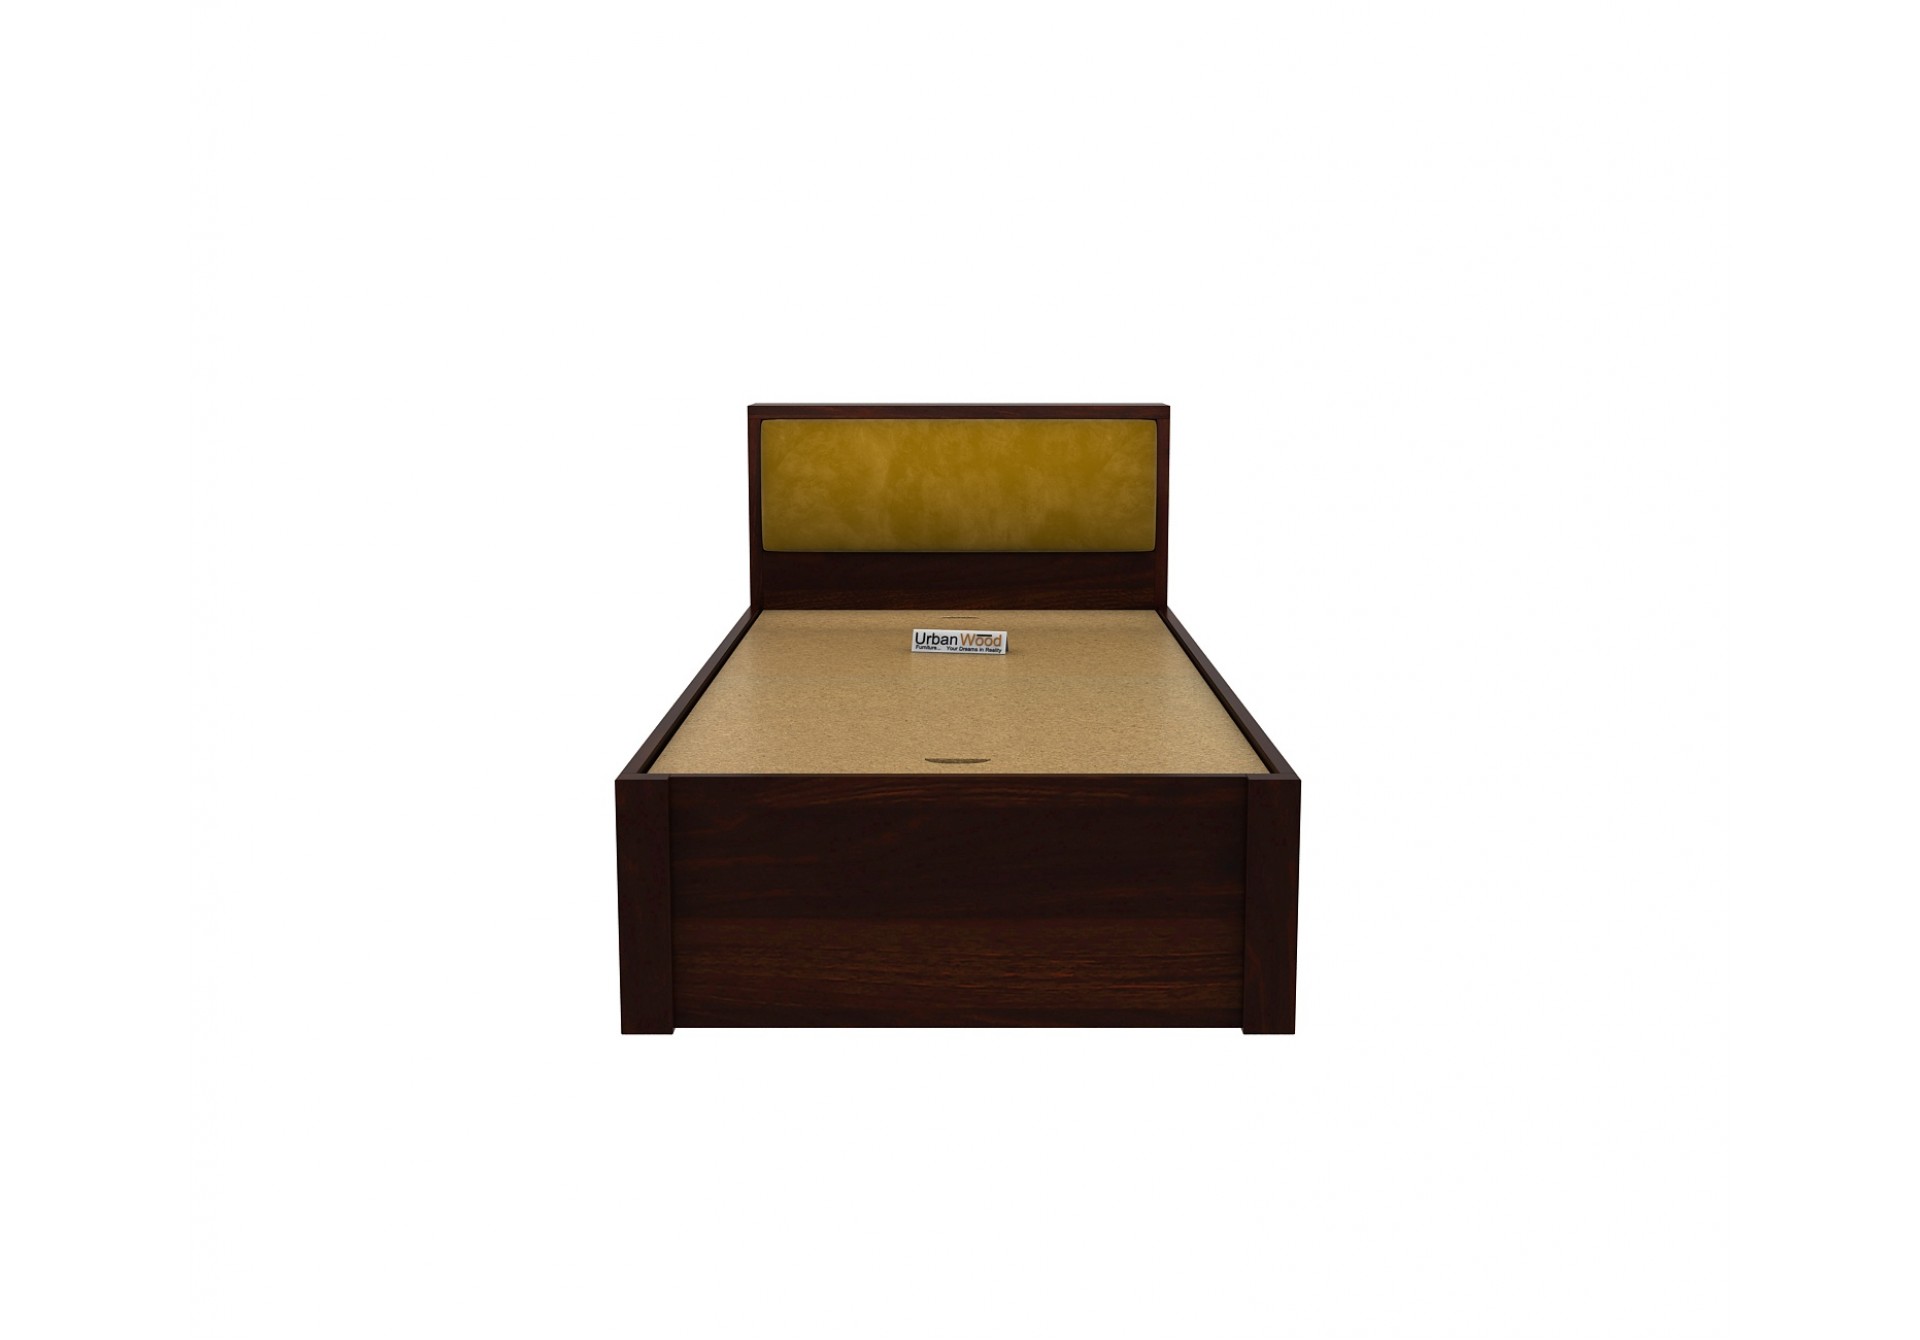 Laverock Single Bed With Storage 